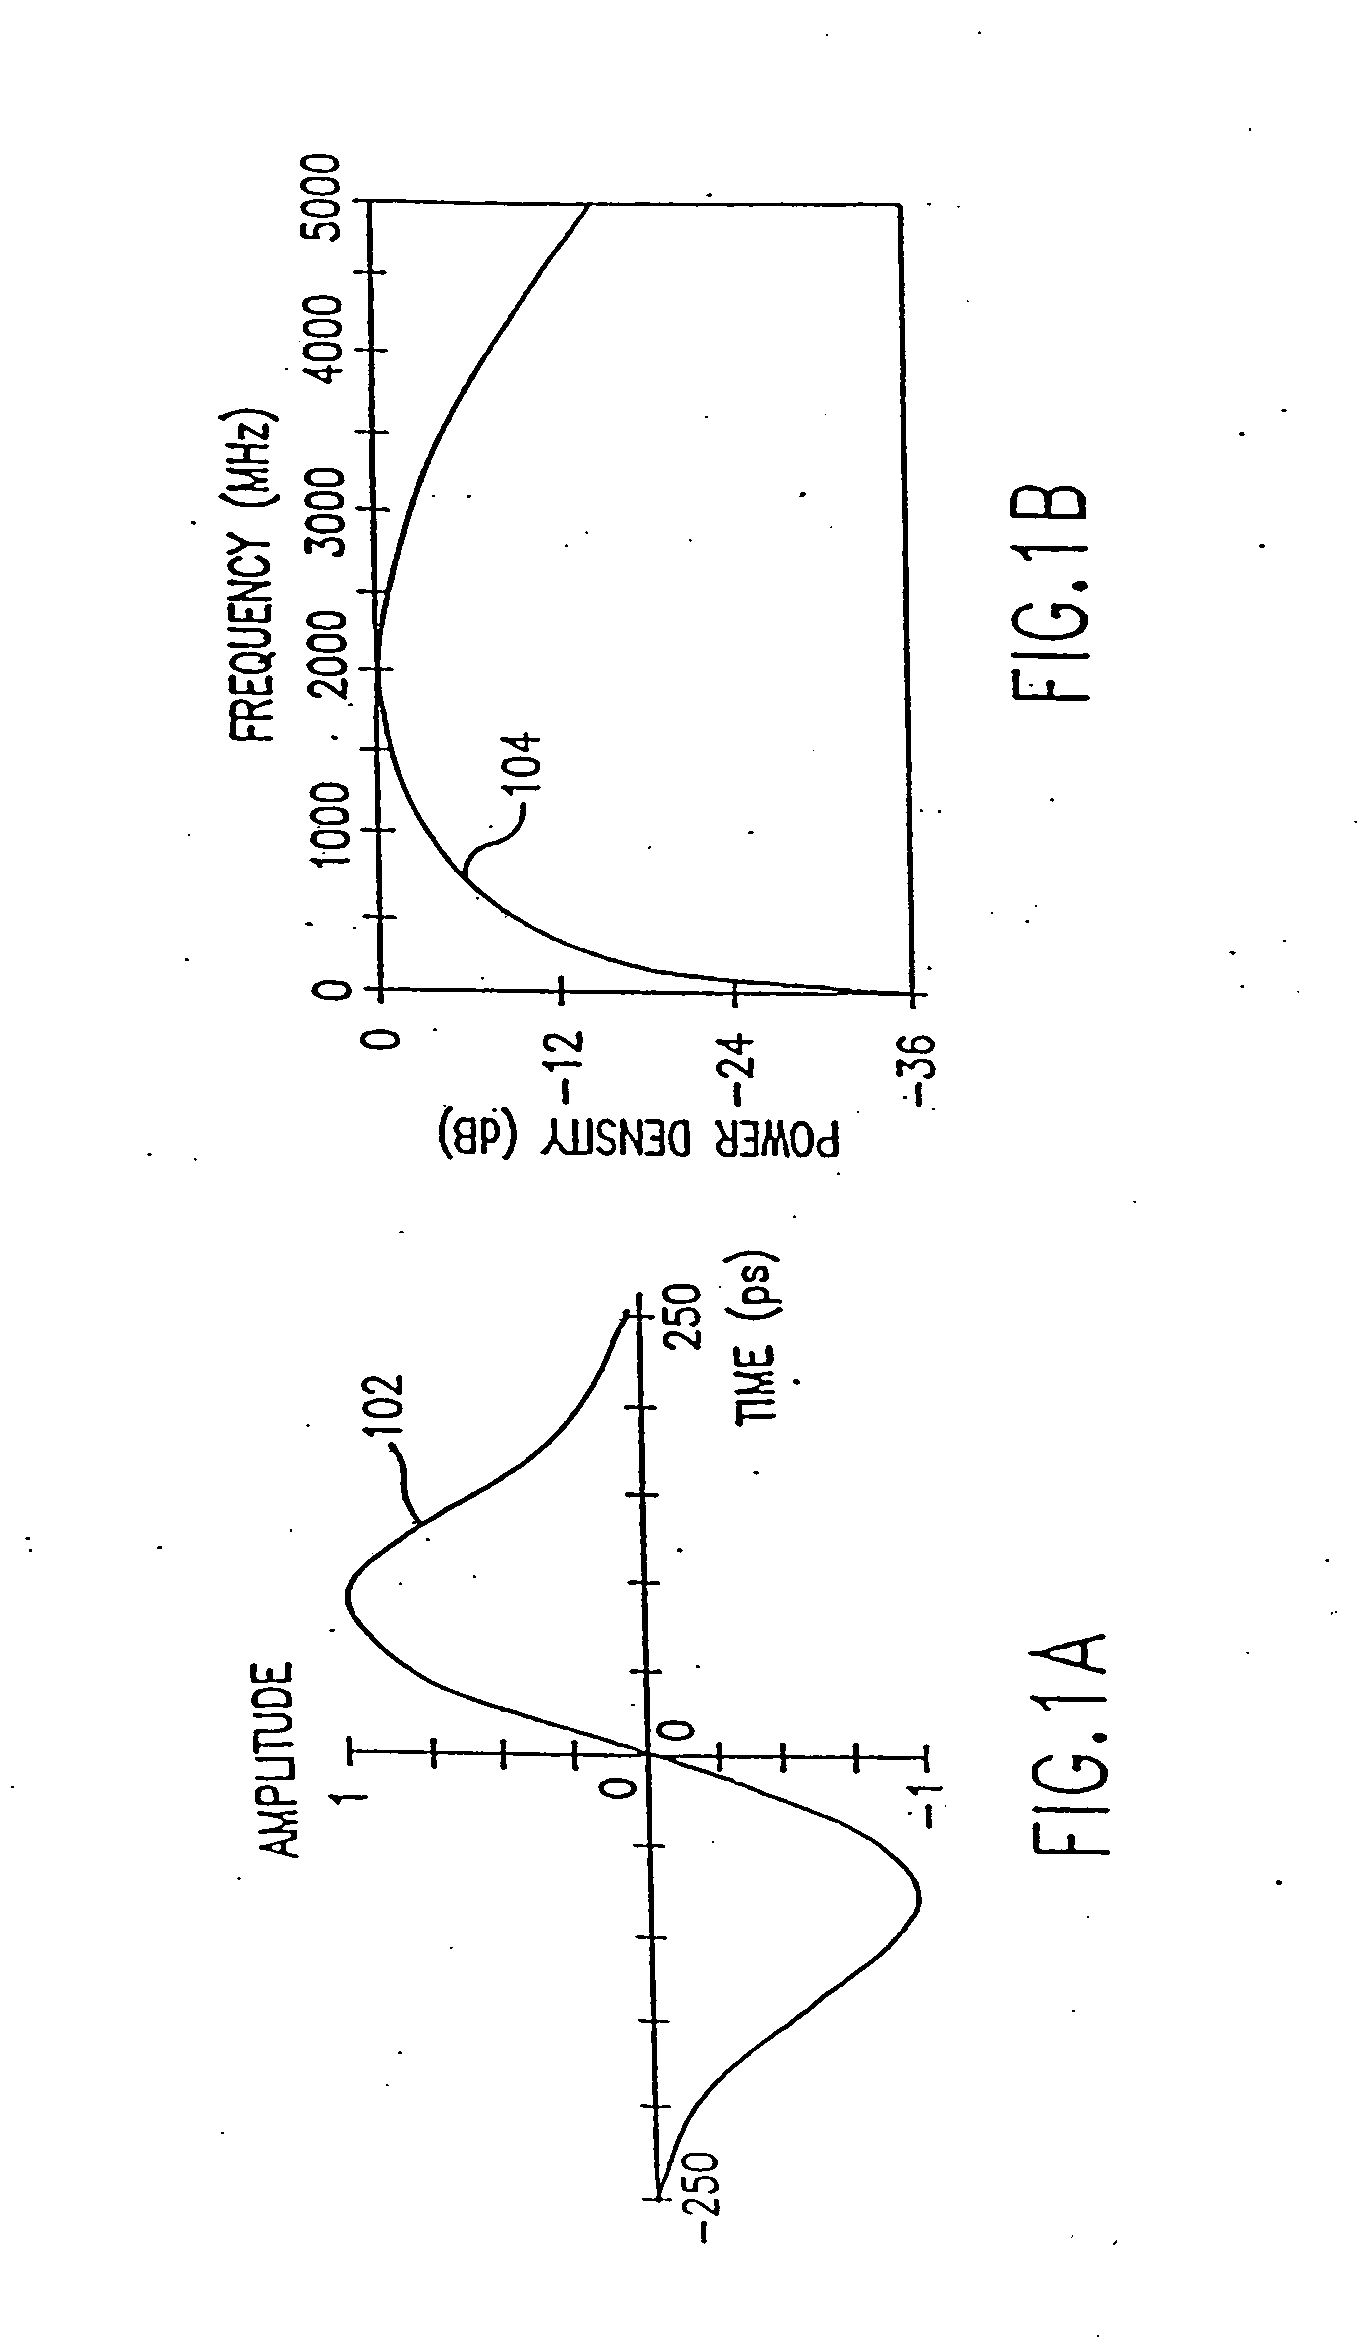 System and method for monitoring assets, objects, people and animals utilizing impulse radio